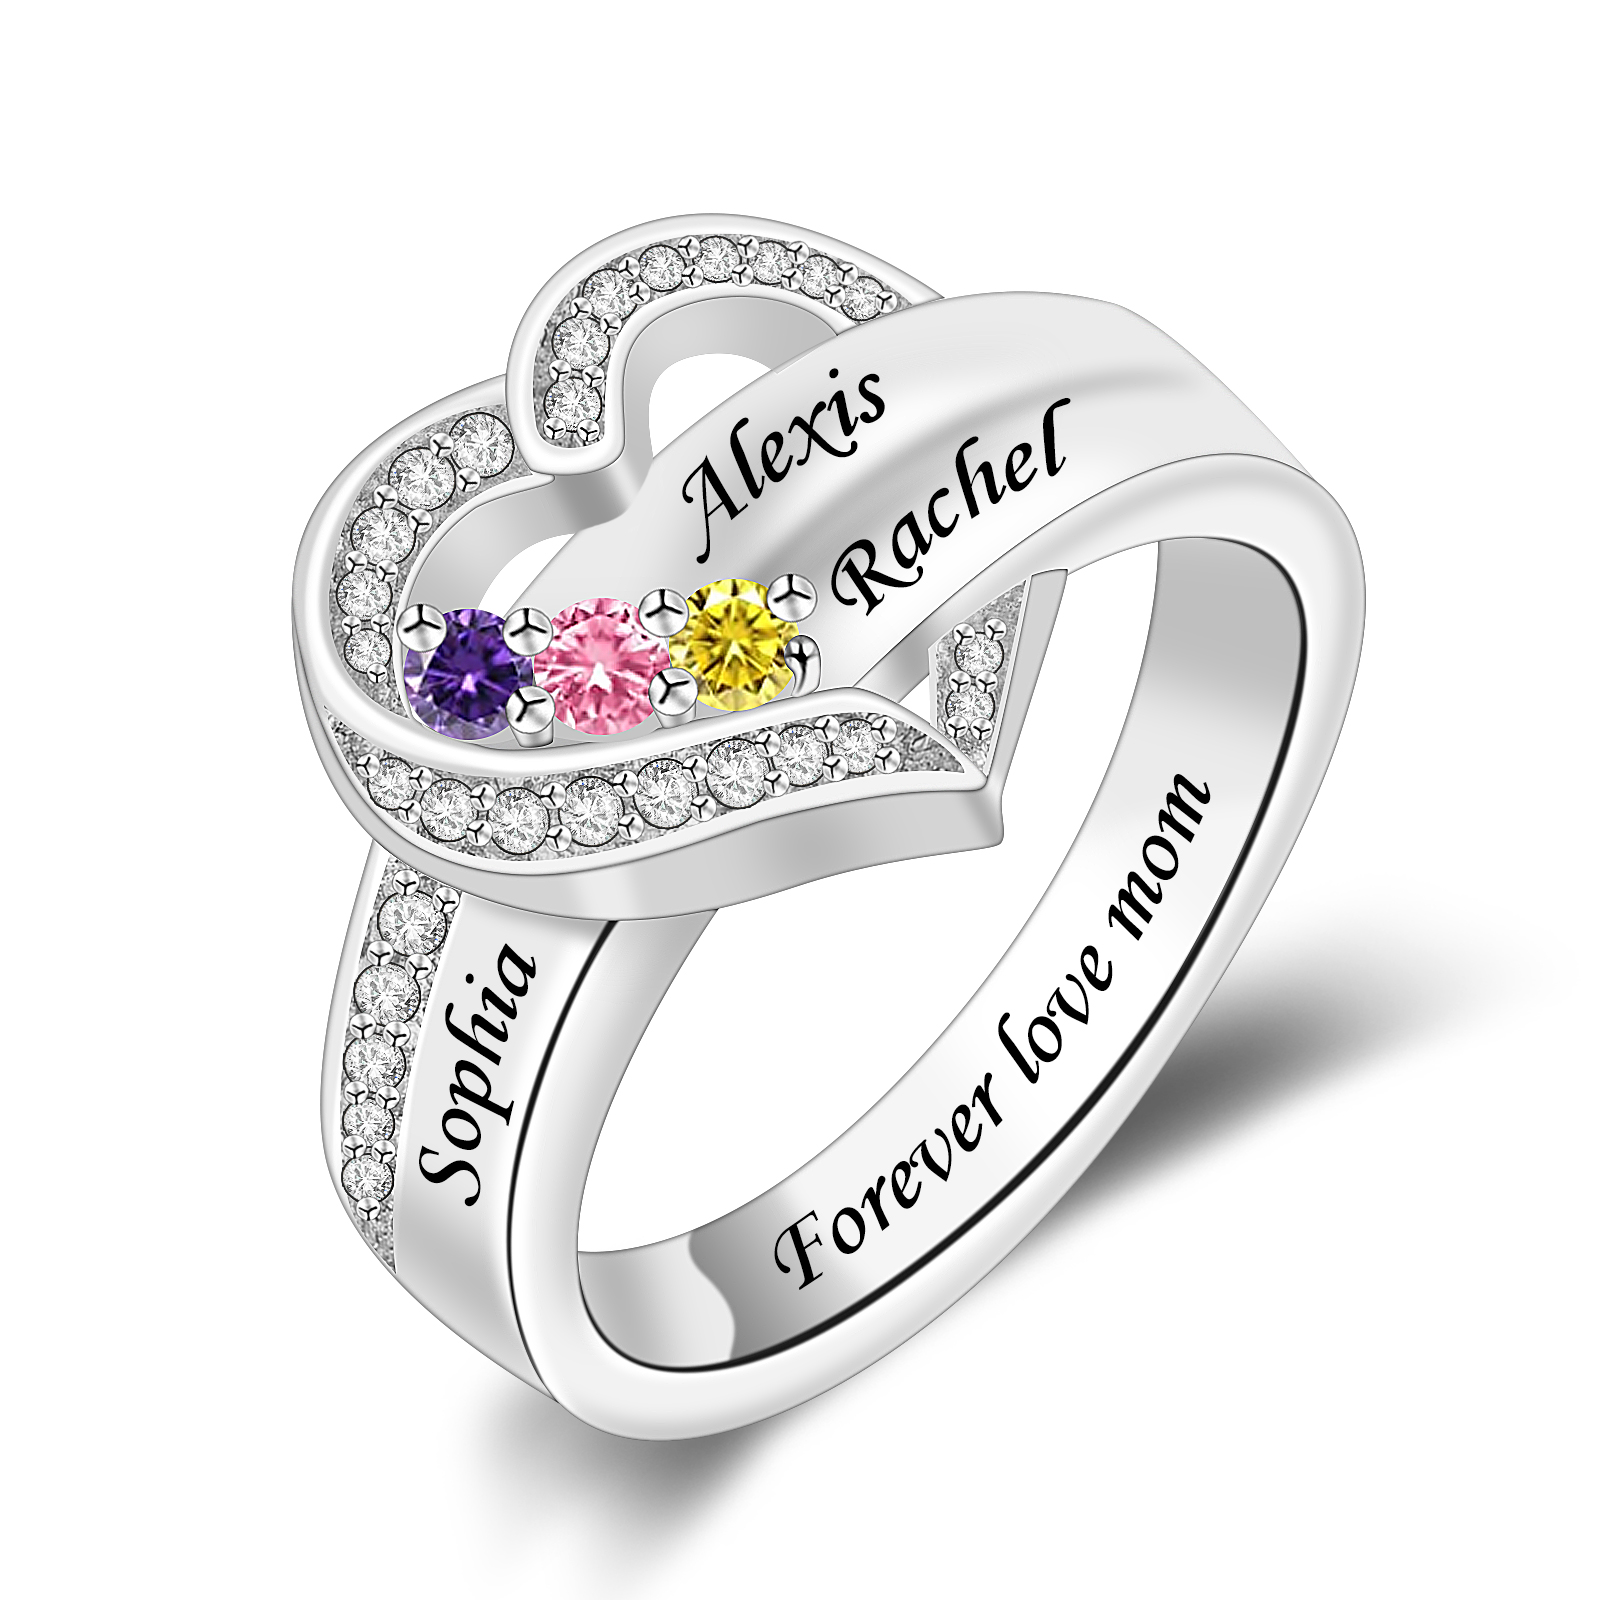 R6-1-3 Heart Mother Ring with Engraved Names and Simulated Birthstone